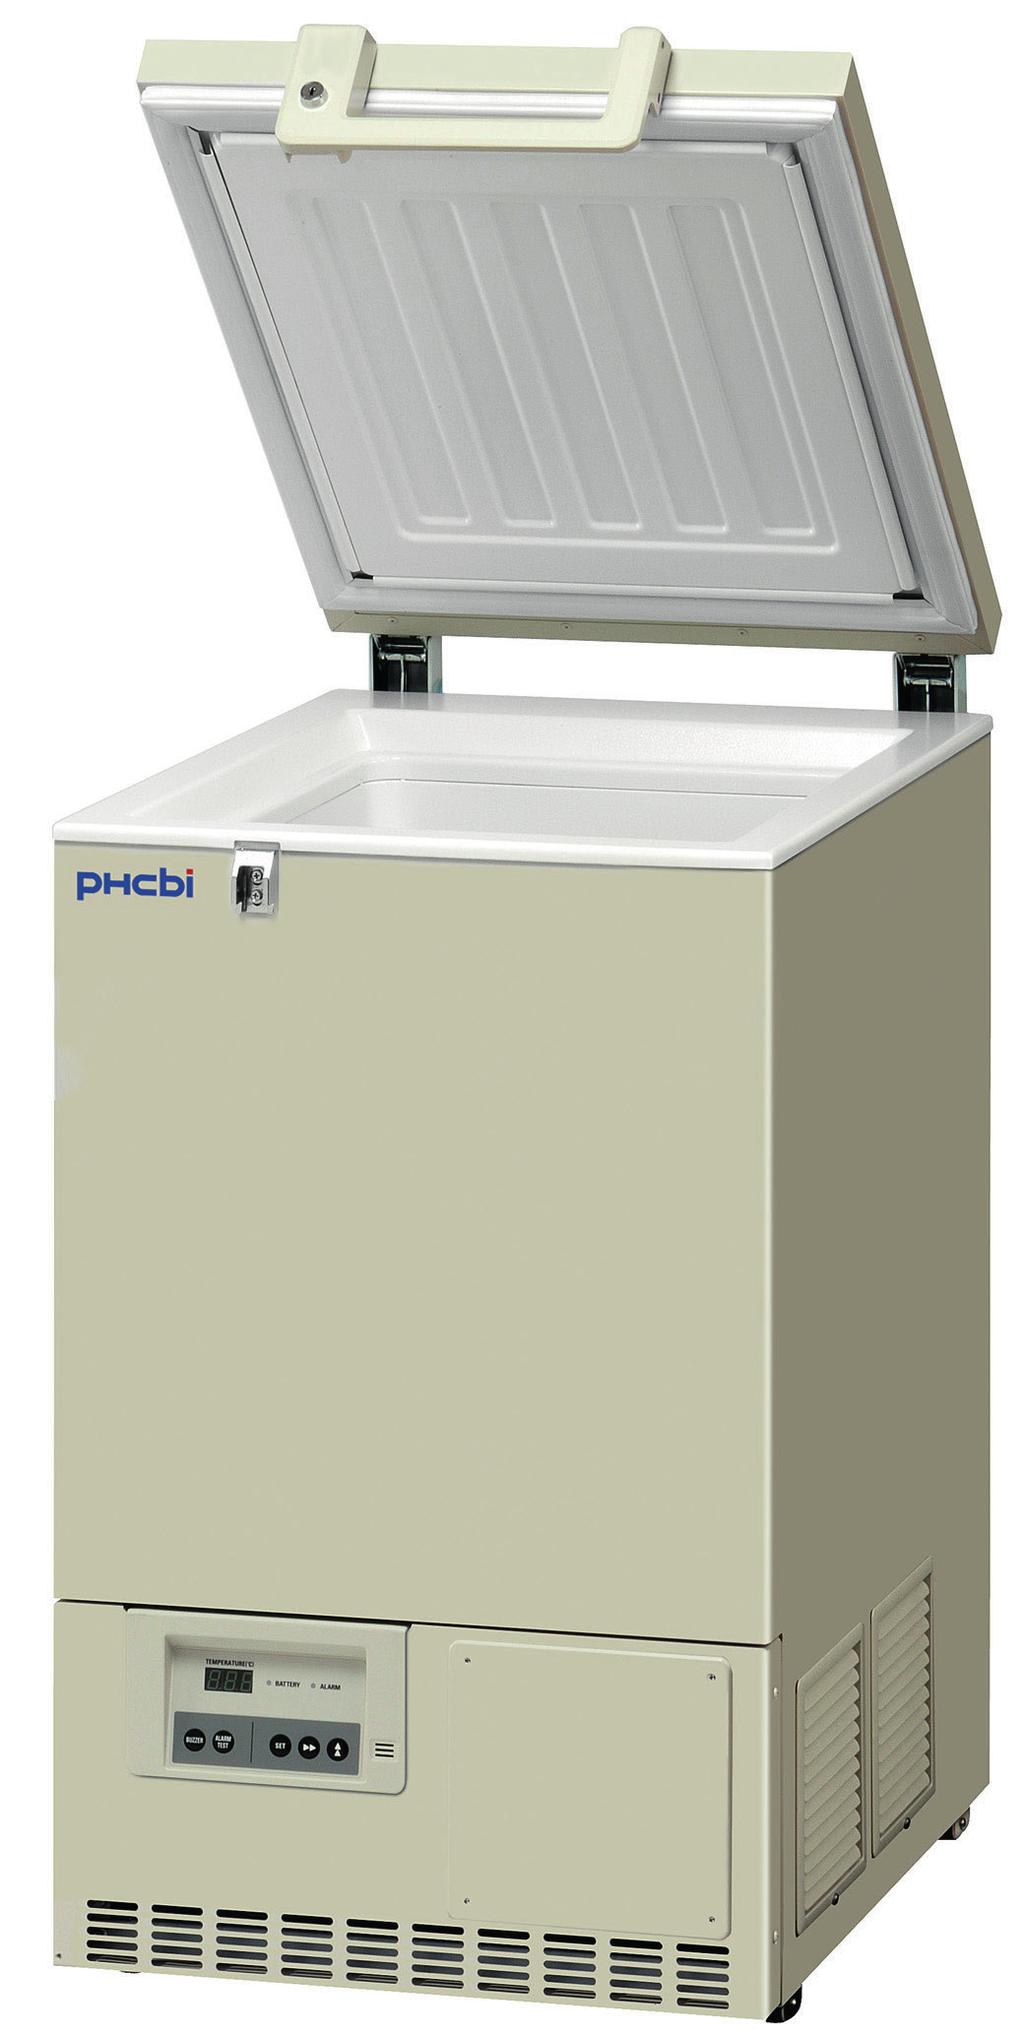 HIGH EFFICIENCY INSULATION PHCbi s patented VIP PLUS technology has resulted in a revolutionary vacuum insulation cabinet construction that reduces wall thickness by approximately one half and